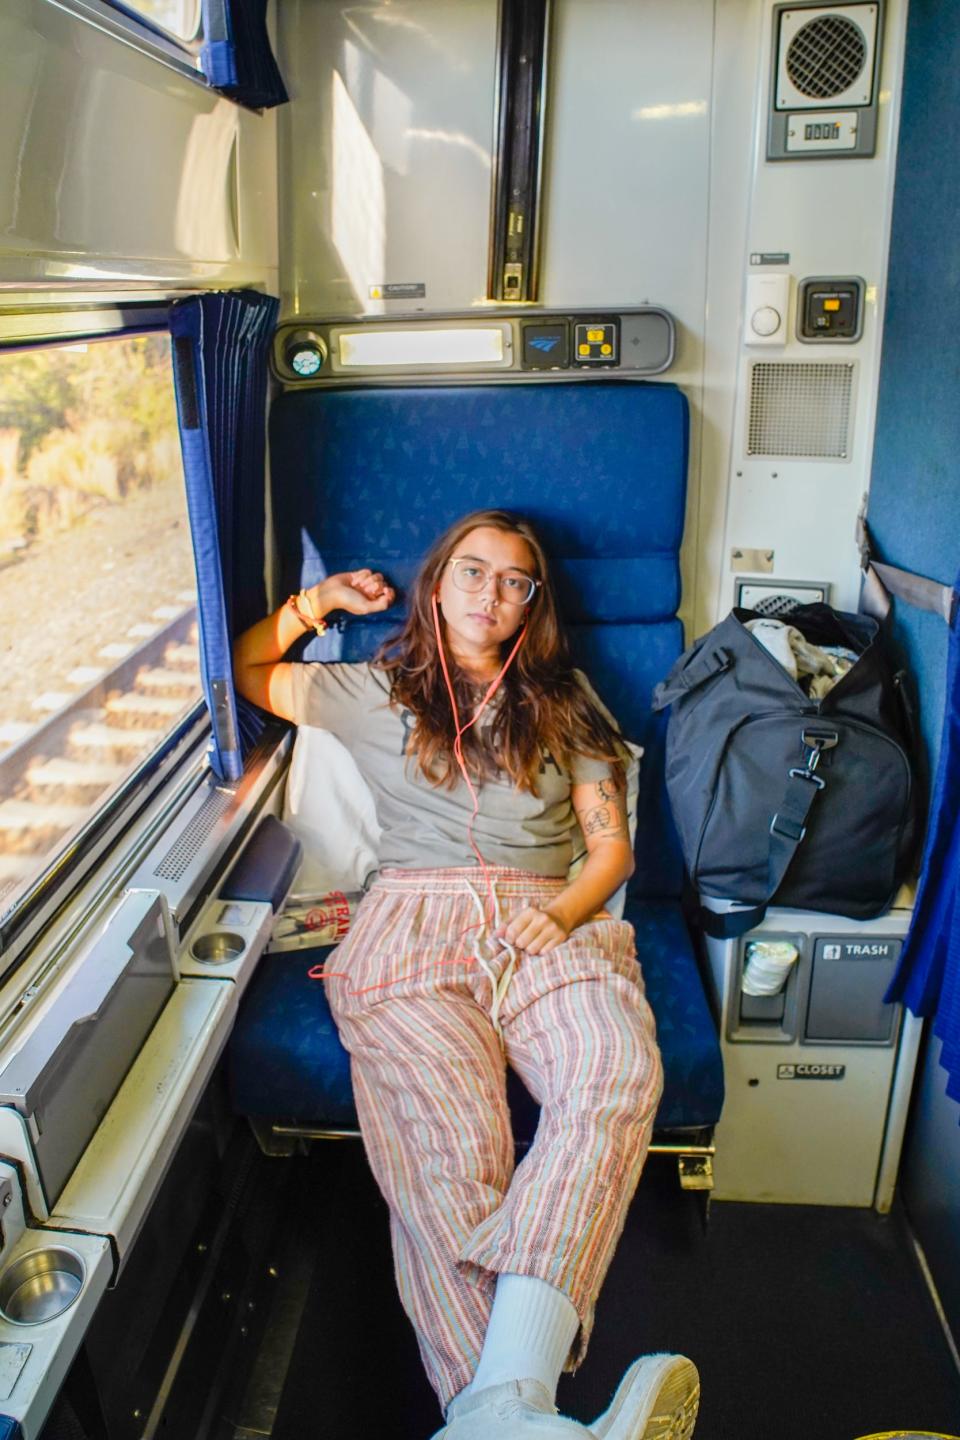 The author sits on the train with her feet up